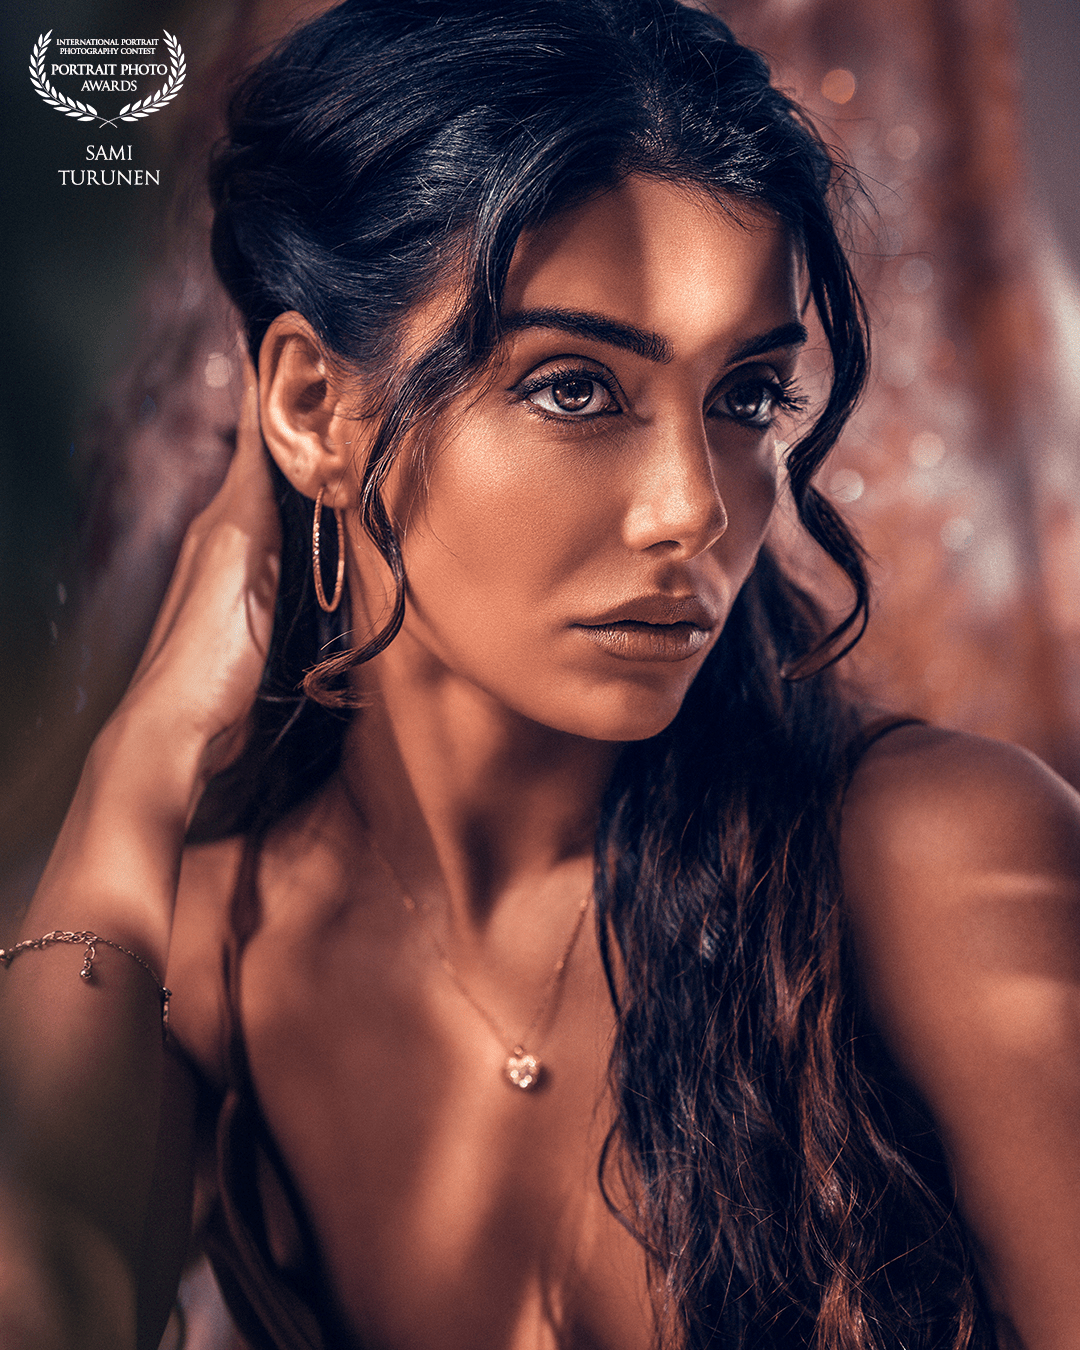 This frame is shot in a studio where we did build an oasis. Lighting is done is using read plants and background created using fabrics with sparkles. Thank you Ashma Aziz for modelling. This frame is one of my all time favorites.